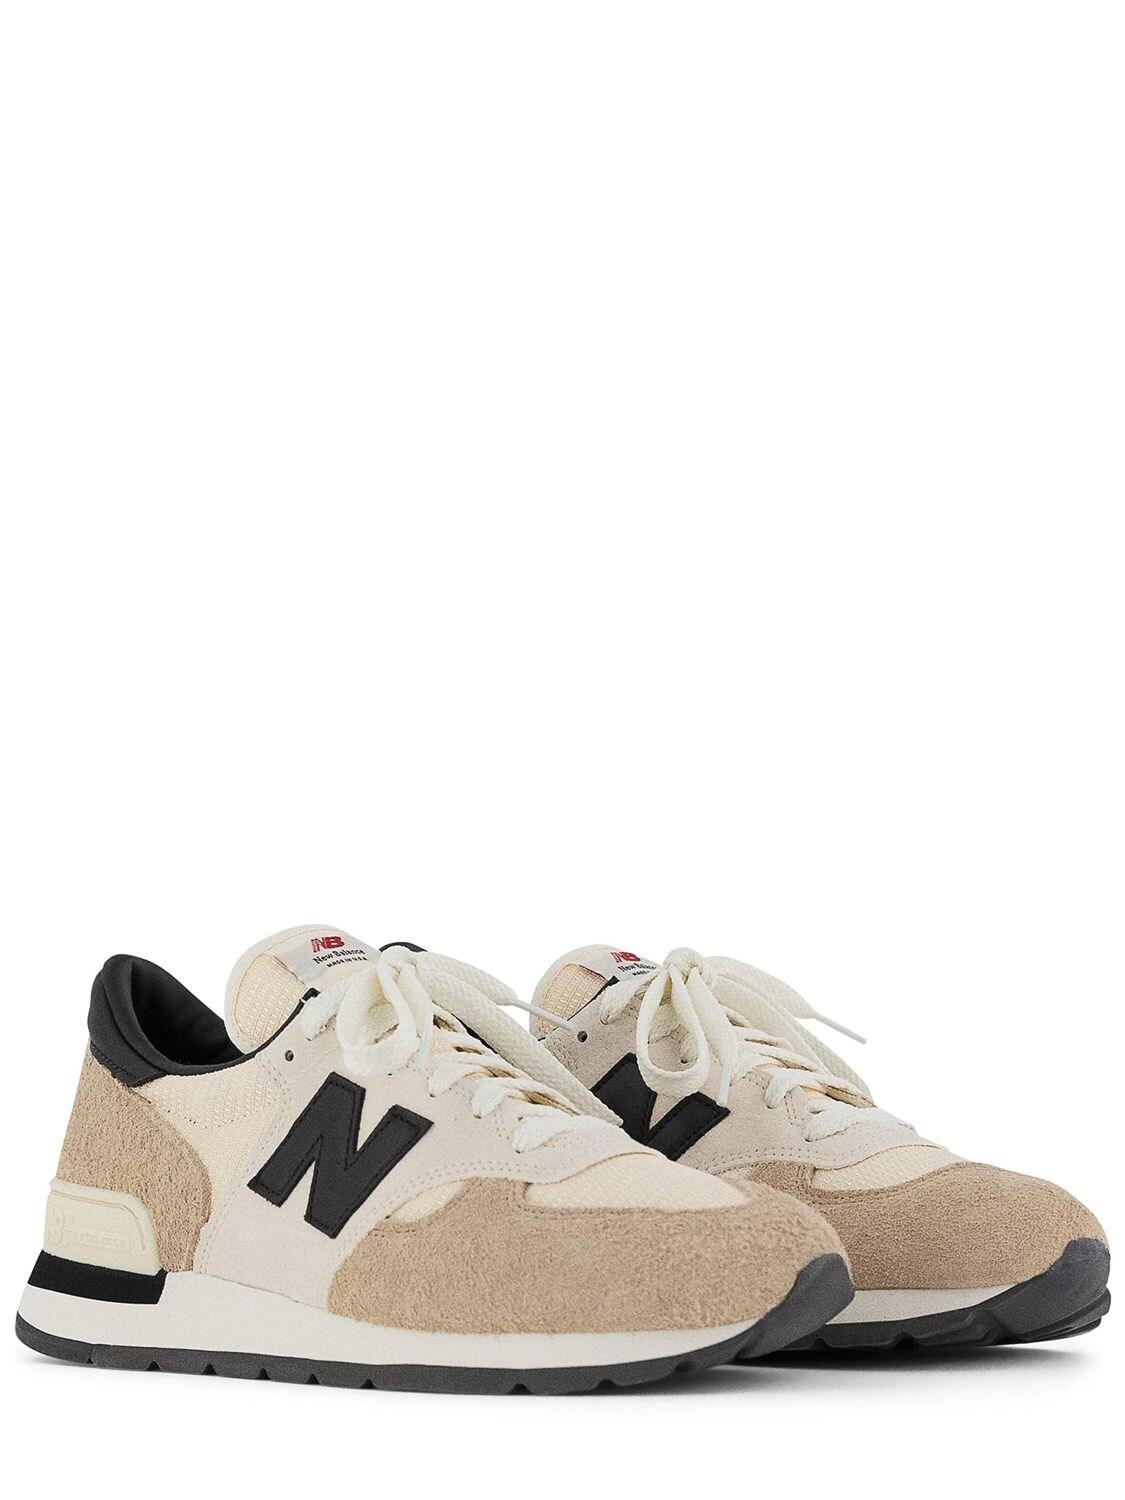 New Balance 990 V1 Sneakers in Natural for Men | Lyst